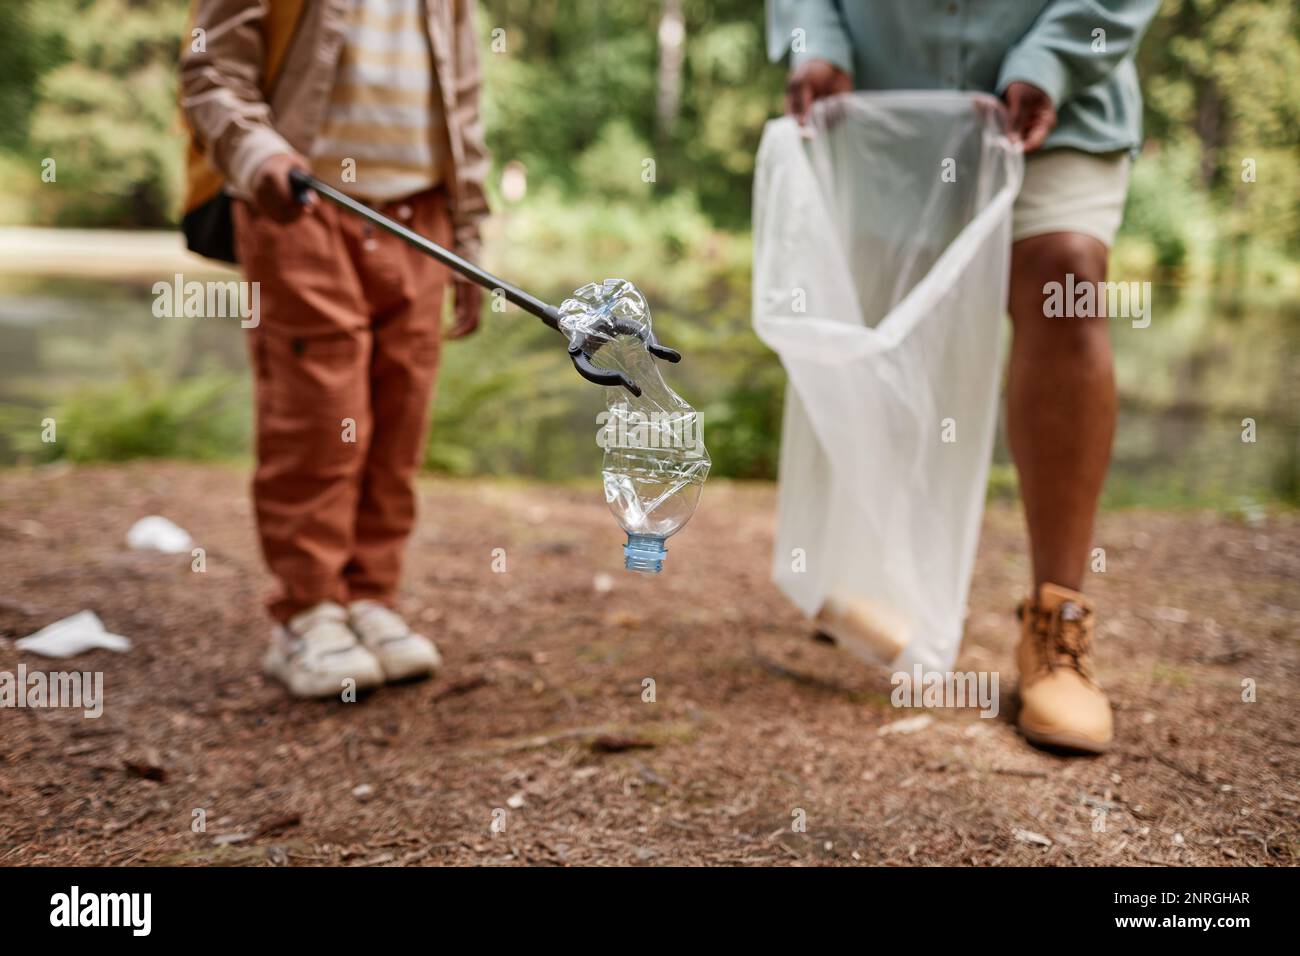 Close up of little girl picking up plastic bottle outdoors helping clean nature, copy space Stock Photo